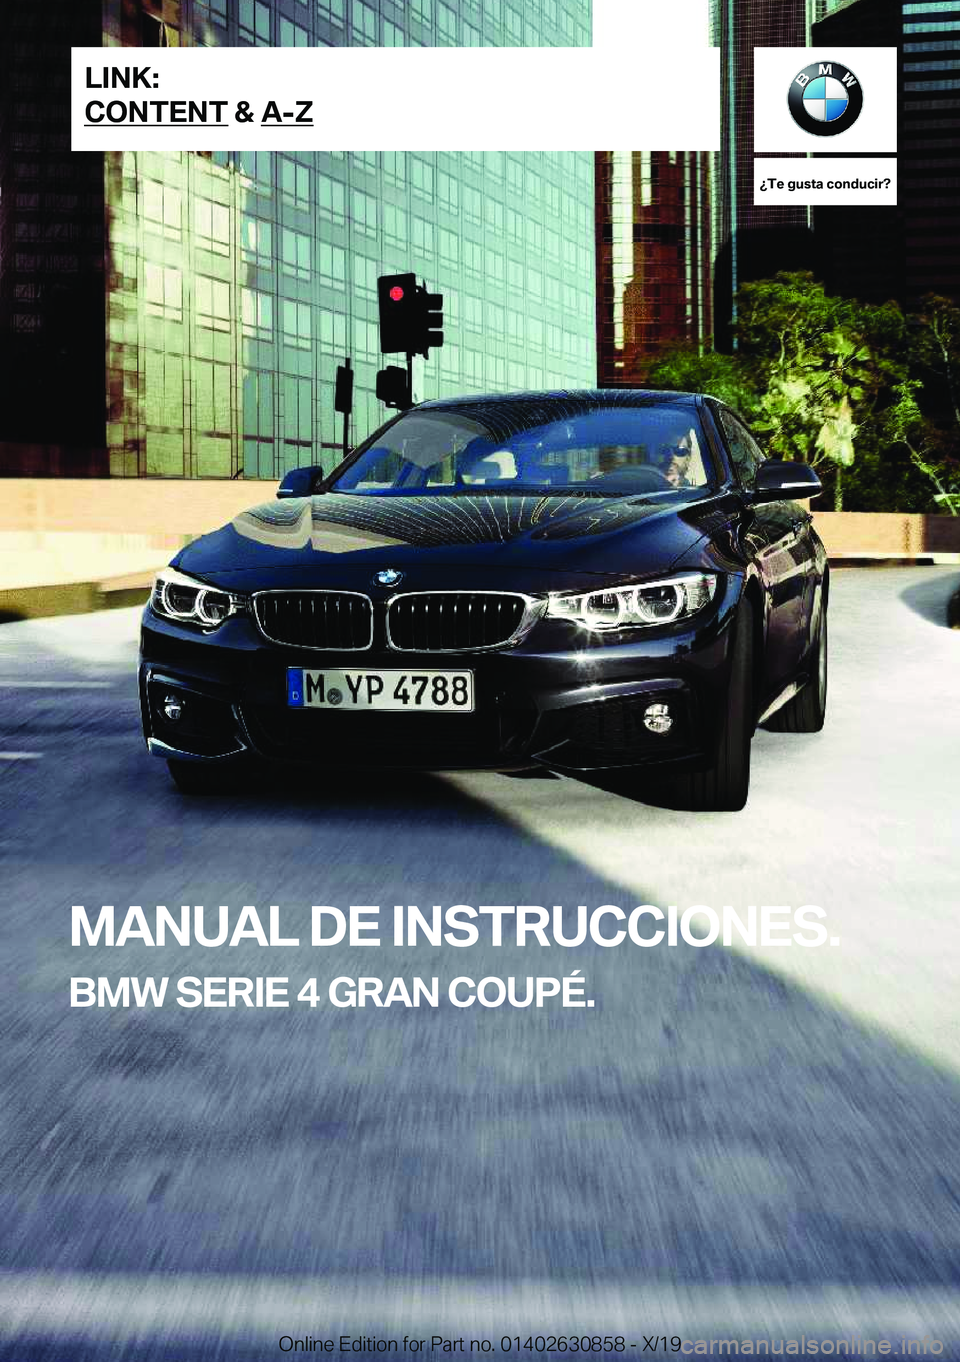 BMW 4 SERIES GRAN COUPE 2020  Manuales de Empleo (in Spanish) ��T�e��g�u�s�t�a��c�o�n�d�u�c�i�r� 
�M�A�N�U�A�L��D�E��I�N�S�T�R�U�C�C�I�O�N�E�S�.
�B�M�W��S�E�R�I�E��4��G�R�A�N��C�O�U�P�